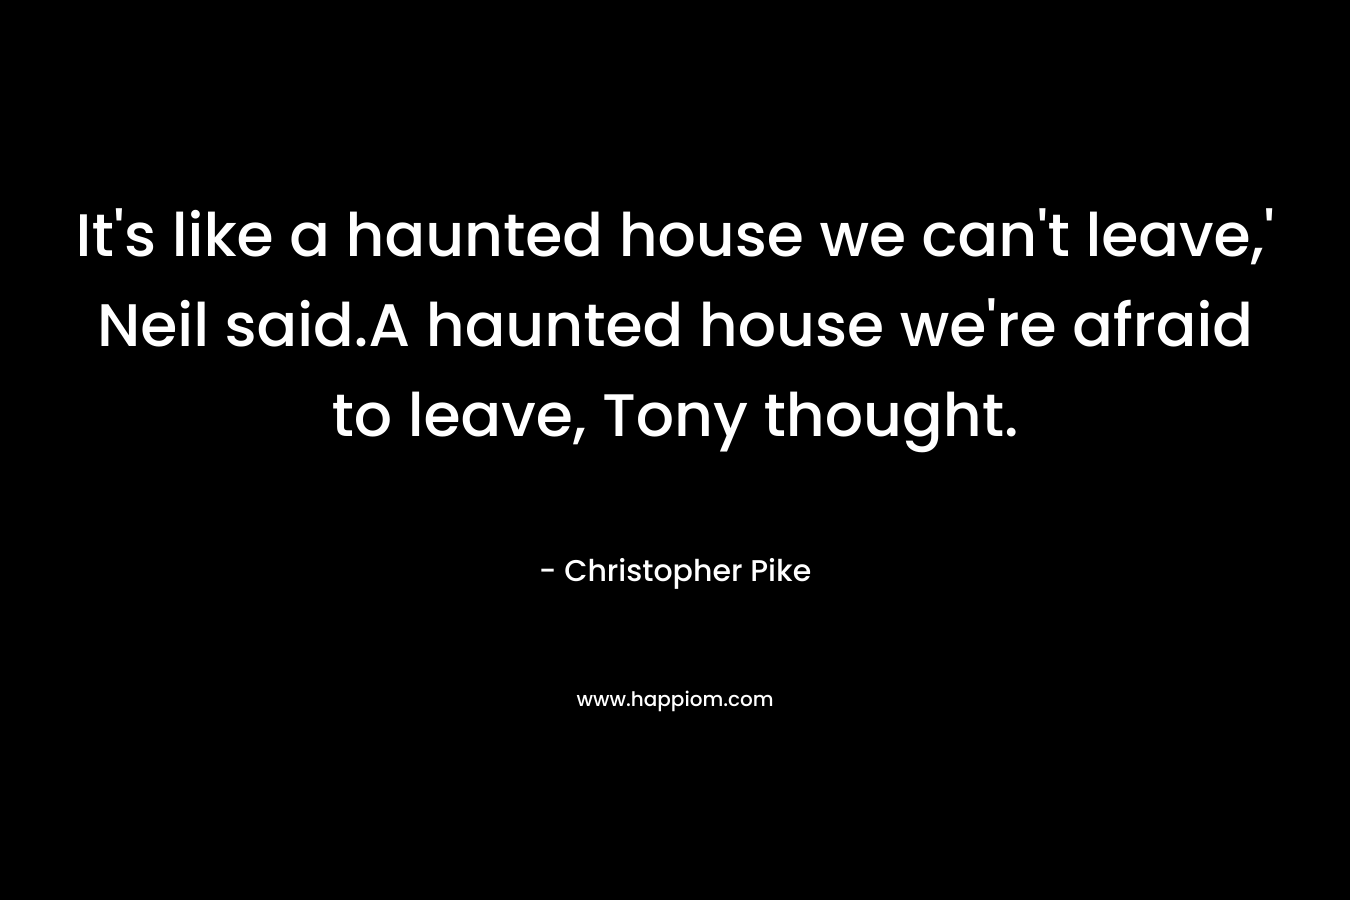 It’s like a haunted house we can’t leave,’ Neil said.A haunted house we’re afraid to leave, Tony thought. – Christopher Pike